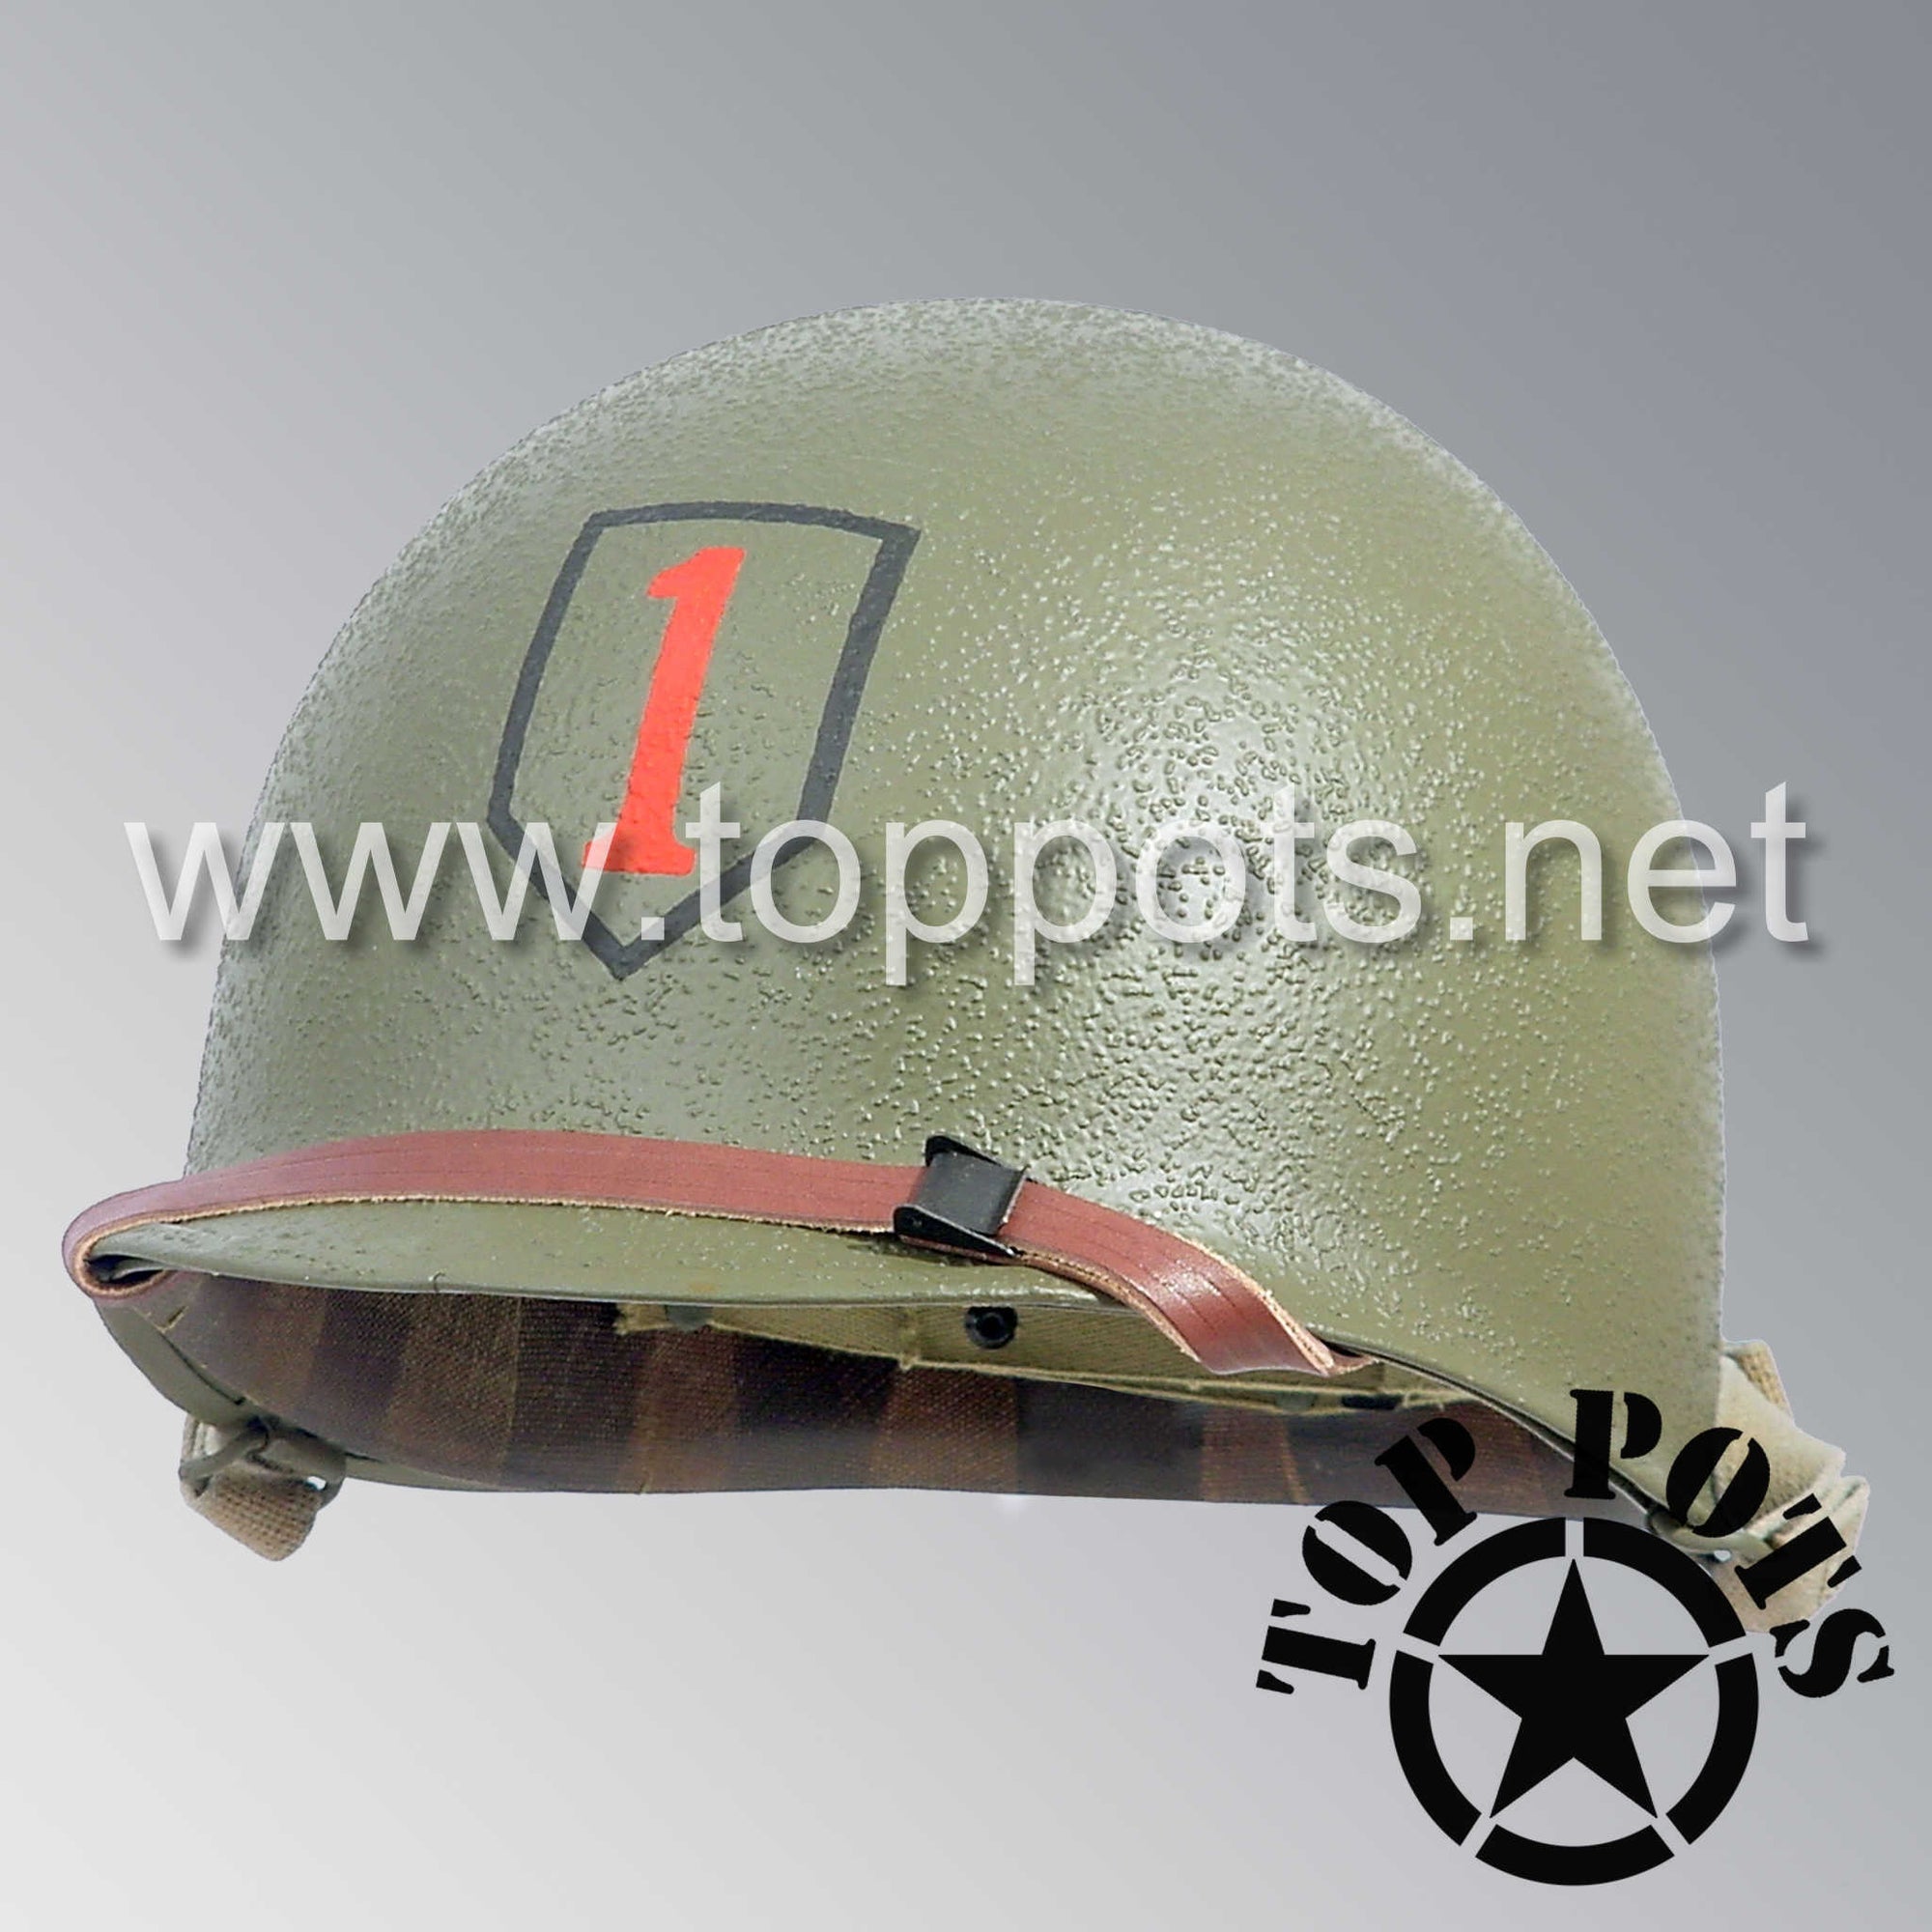 WWII US Army Restored Original M1 Infantry Helmet Swivel Bale Shell and Liner with 1st Infantry Division Emblem